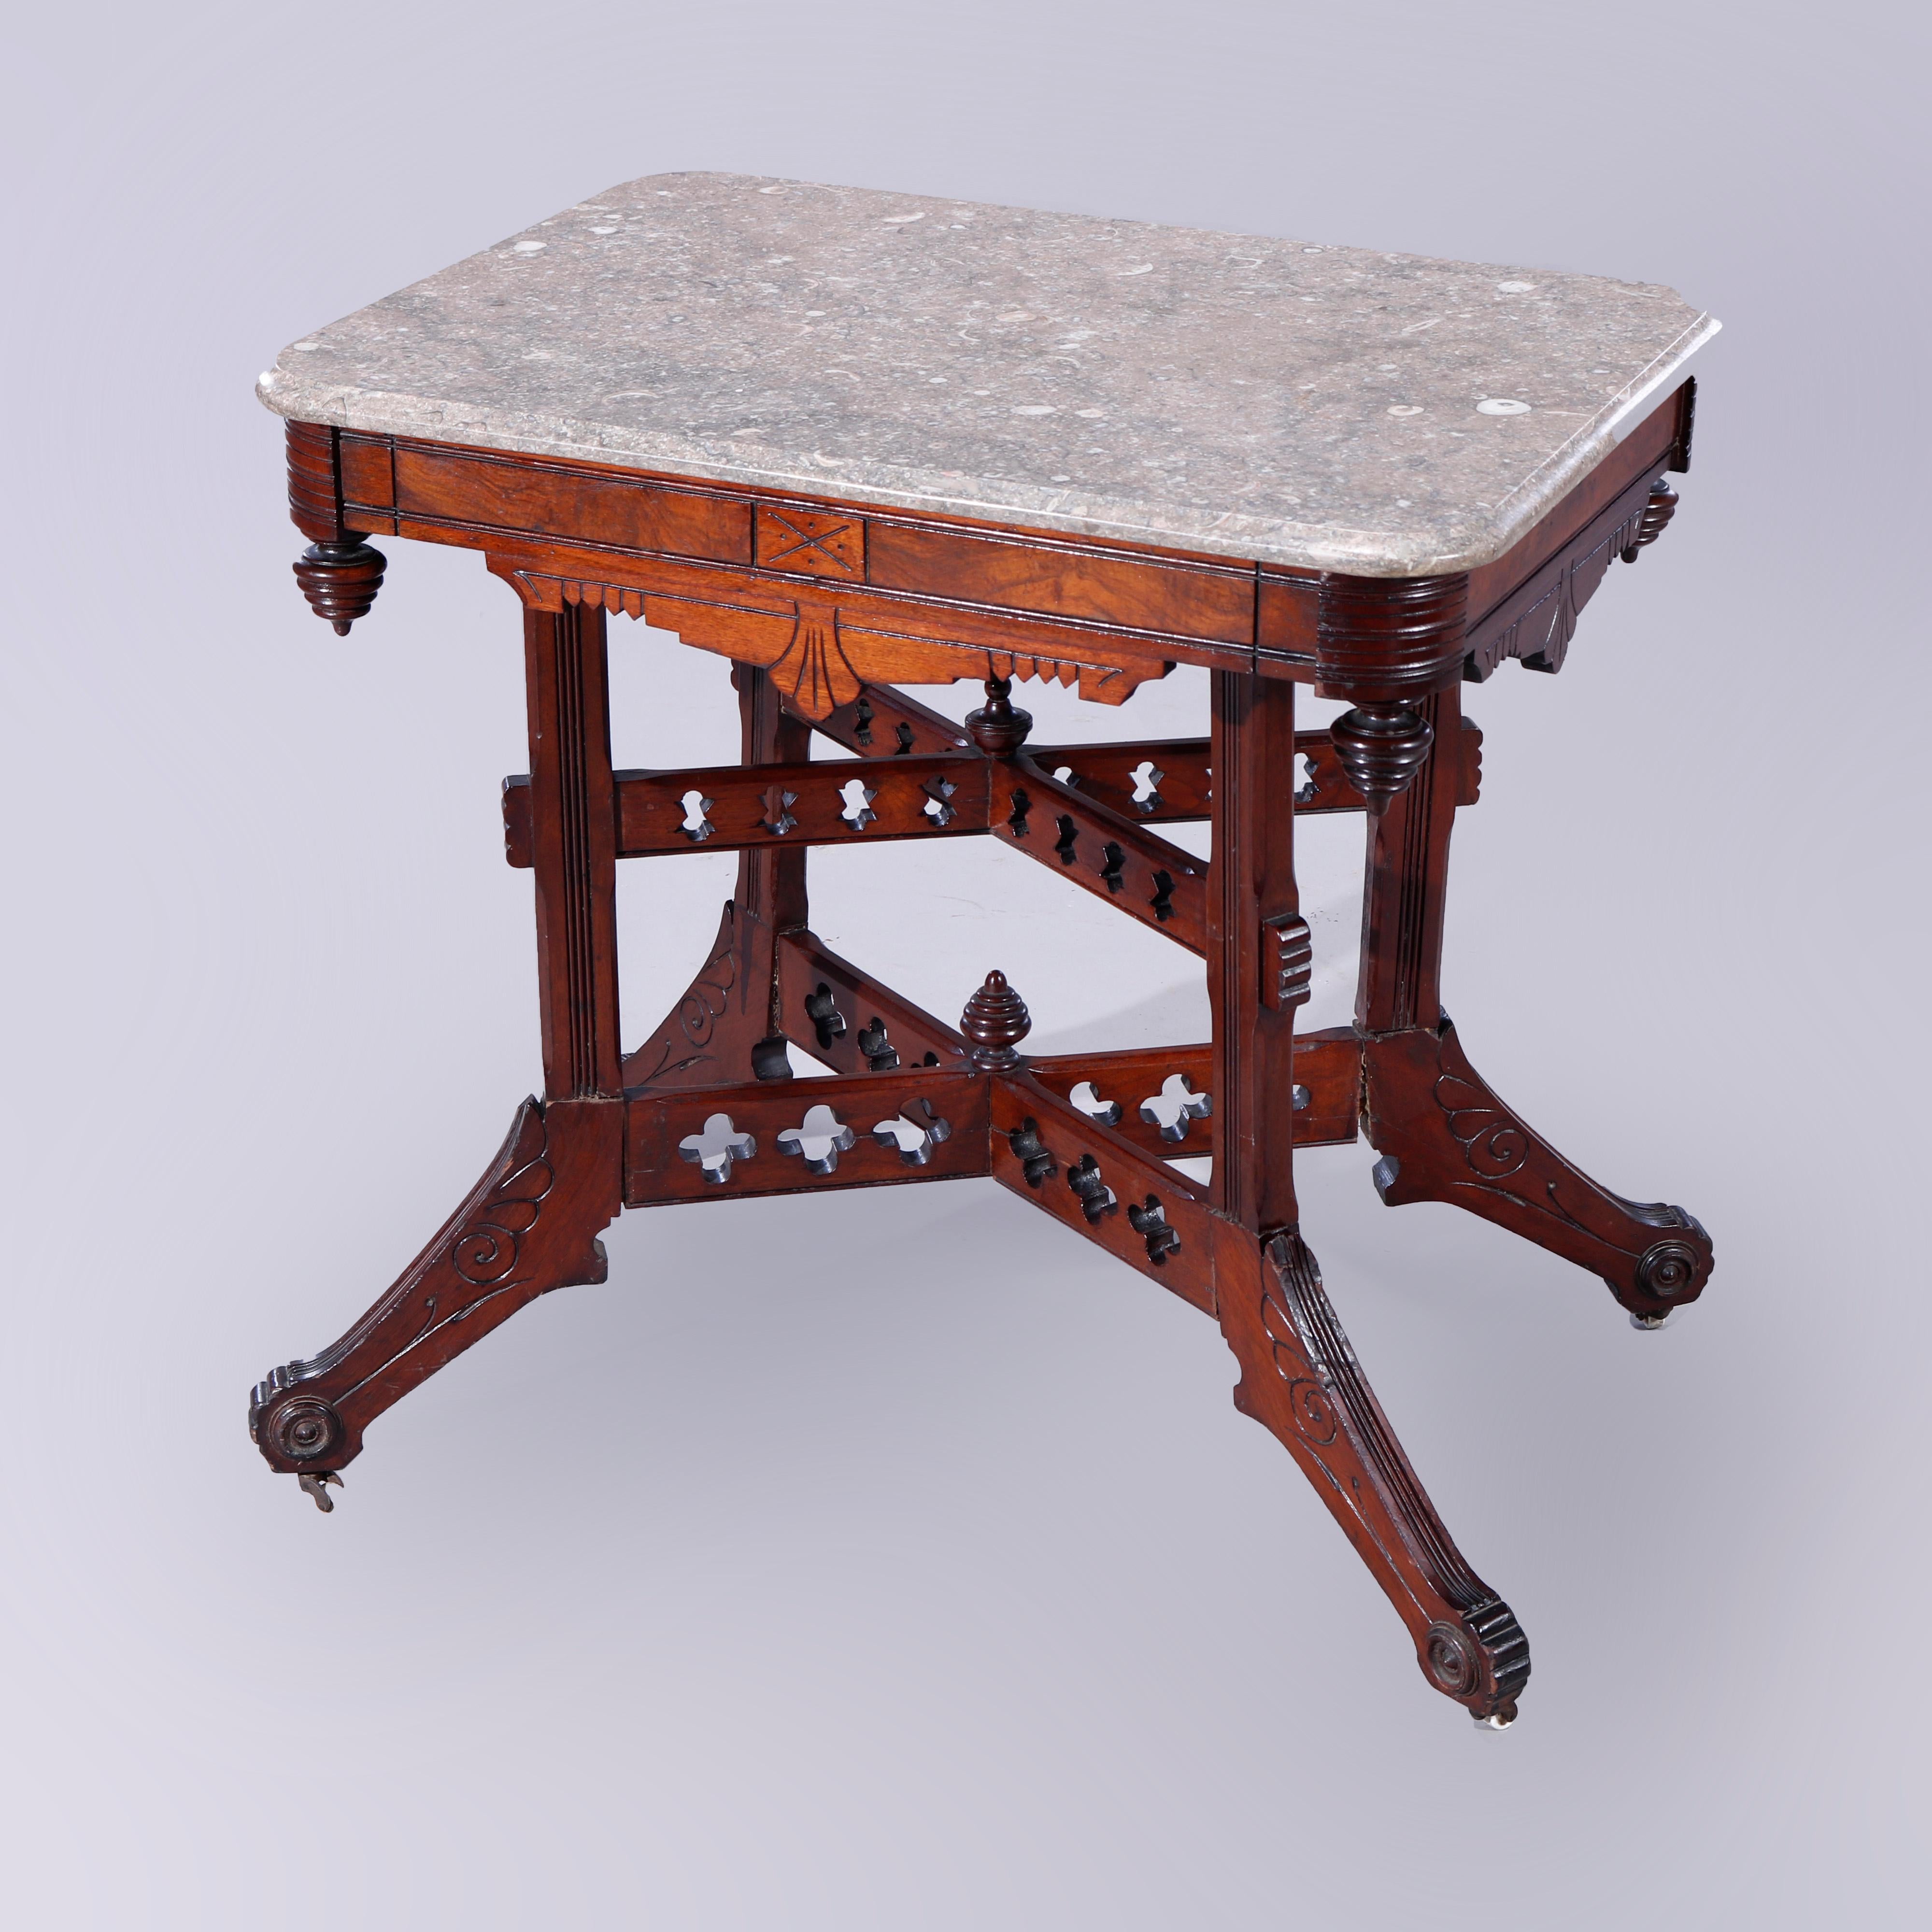 Antique Eastlake parlor table offers beveled specimen marble top over walnut base with incised decoration, beehive drop finials and and pierced x-stretchers, c1890

Measures - 29.75'' H x 30'' W x 22'' D.

Catalogue Note: Ask about DISCOUNTED